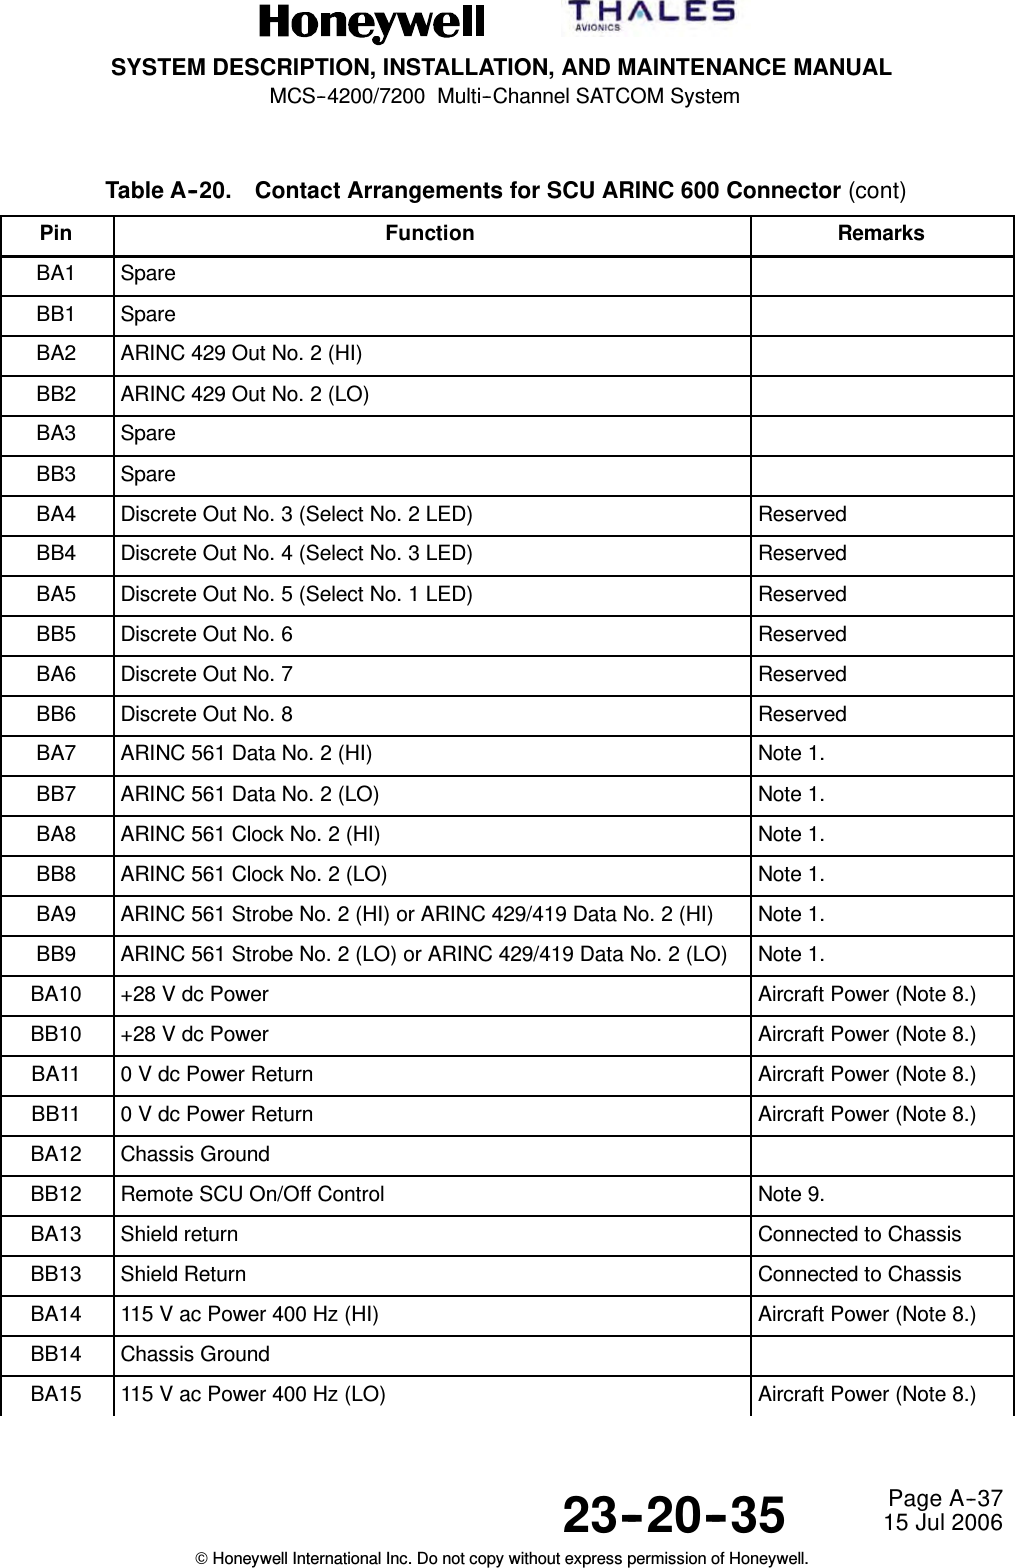 SYSTEM DESCRIPTION, INSTALLATION, AND MAINTENANCE MANUALMCS--4200/7200 Multi--Channel SATCOM System23--20--35 15 Jul 2006Honeywell International Inc. Do not copy without express permission of Honeywell.Page A--37Table A--20. Contact Arrangements for SCU ARINC 600 Connector (cont)Pin RemarksFunctionBA1 SpareBB1 SpareBA2 ARINC 429 Out No. 2 (HI)BB2 ARINC 429 Out No. 2 (LO)BA3 SpareBB3 SpareBA4 Discrete Out No. 3 (Select No. 2 LED) ReservedBB4 Discrete Out No. 4 (Select No. 3 LED) ReservedBA5 Discrete Out No. 5 (Select No. 1 LED) ReservedBB5 Discrete Out No. 6 ReservedBA6 Discrete Out No. 7 ReservedBB6 Discrete Out No. 8 ReservedBA7 ARINC 561 Data No. 2 (HI) Note 1.BB7 ARINC 561 Data No. 2 (LO) Note 1.BA8 ARINC 561 Clock No. 2 (HI) Note 1.BB8 ARINC 561 Clock No. 2 (LO) Note 1.BA9 ARINC 561 Strobe No. 2 (HI) or ARINC 429/419 Data No. 2 (HI) Note 1.BB9 ARINC 561 Strobe No. 2 (LO) or ARINC 429/419 Data No. 2 (LO) Note 1.BA10 +28 V dc Power Aircraft Power (Note 8.)BB10 +28 V dc Power Aircraft Power (Note 8.)BA11 0 V dc Power Return Aircraft Power (Note 8.)BB11 0 V dc Power Return Aircraft Power (Note 8.)BA12 Chassis GroundBB12 Remote SCU On/Off Control Note 9.BA13 Shield return Connected to ChassisBB13 Shield Return Connected to ChassisBA14 115 V ac Power 400 Hz (HI) Aircraft Power (Note 8.)BB14 Chassis GroundBA15 115 V ac Power 400 Hz (LO) Aircraft Power (Note 8.)